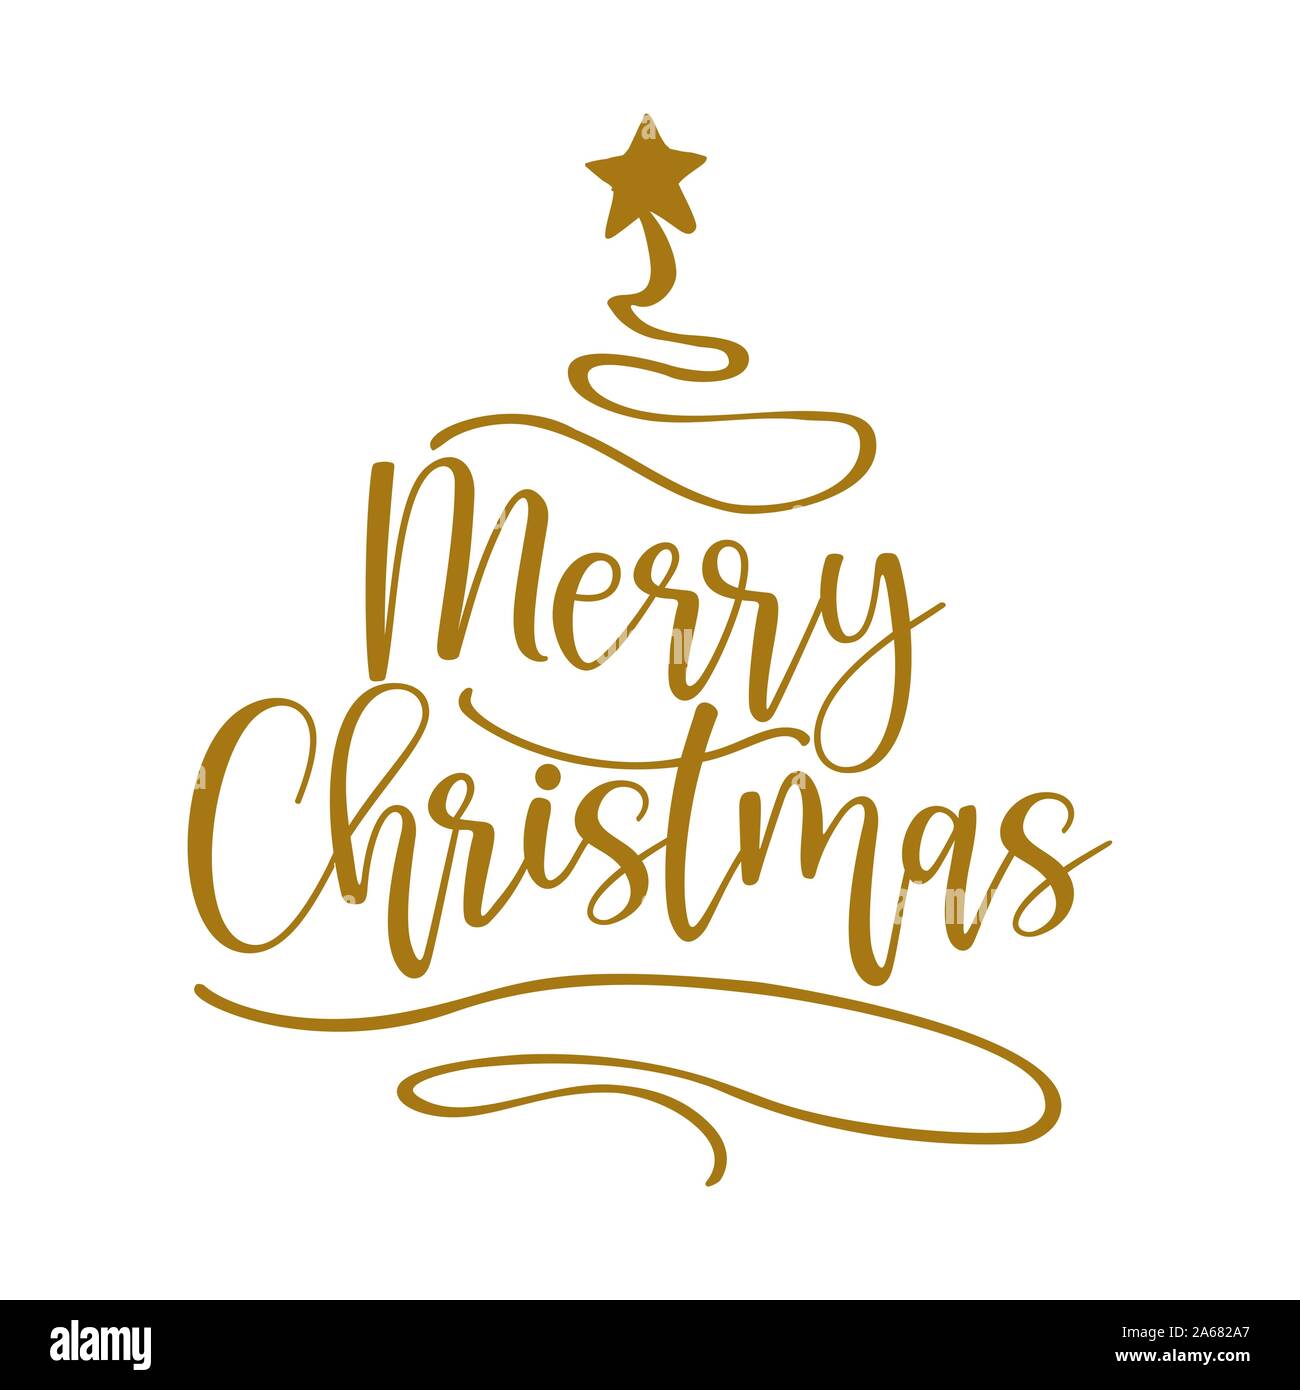 https://c8.alamy.com/comp/2A682A7/merry-christmas-calligraphy-phrase-for-christmas-hand-drawn-lettering-for-xmas-greetings-cards-invitations-good-for-t-shirt-mug-scrap-booking-2A682A7.jpg